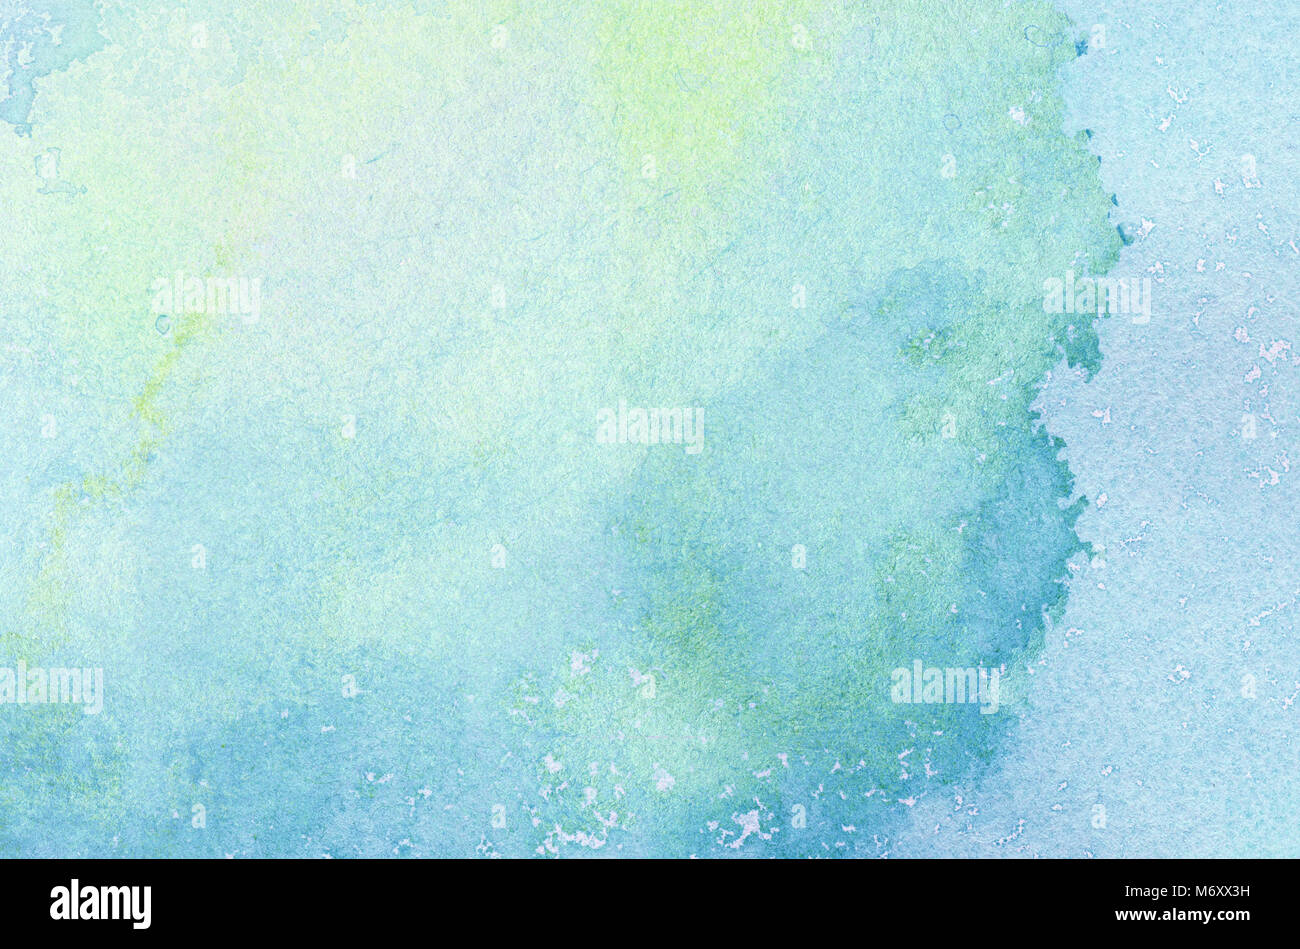 Abstract light blue watercolor background, painted on watercolor paper Stock Photo